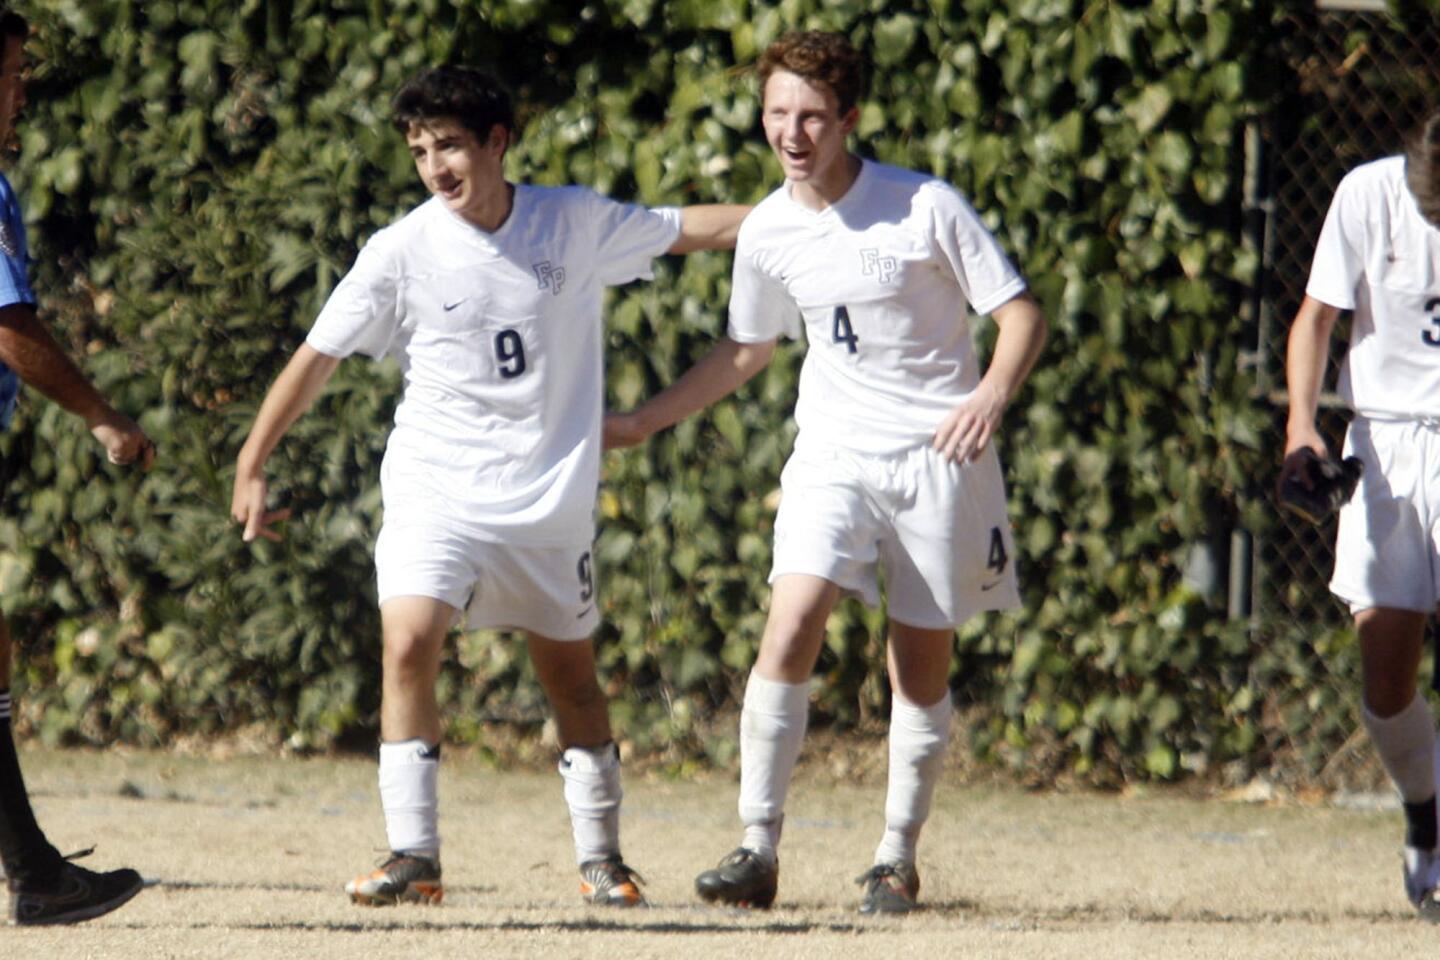 Flintridge Prep's Ari Baraian, left, and Daniel Enzminger hug each other after their team makes a point during a game against Pasadena at Flintridge Prep in La Canada on Saturday, January 19 2013.